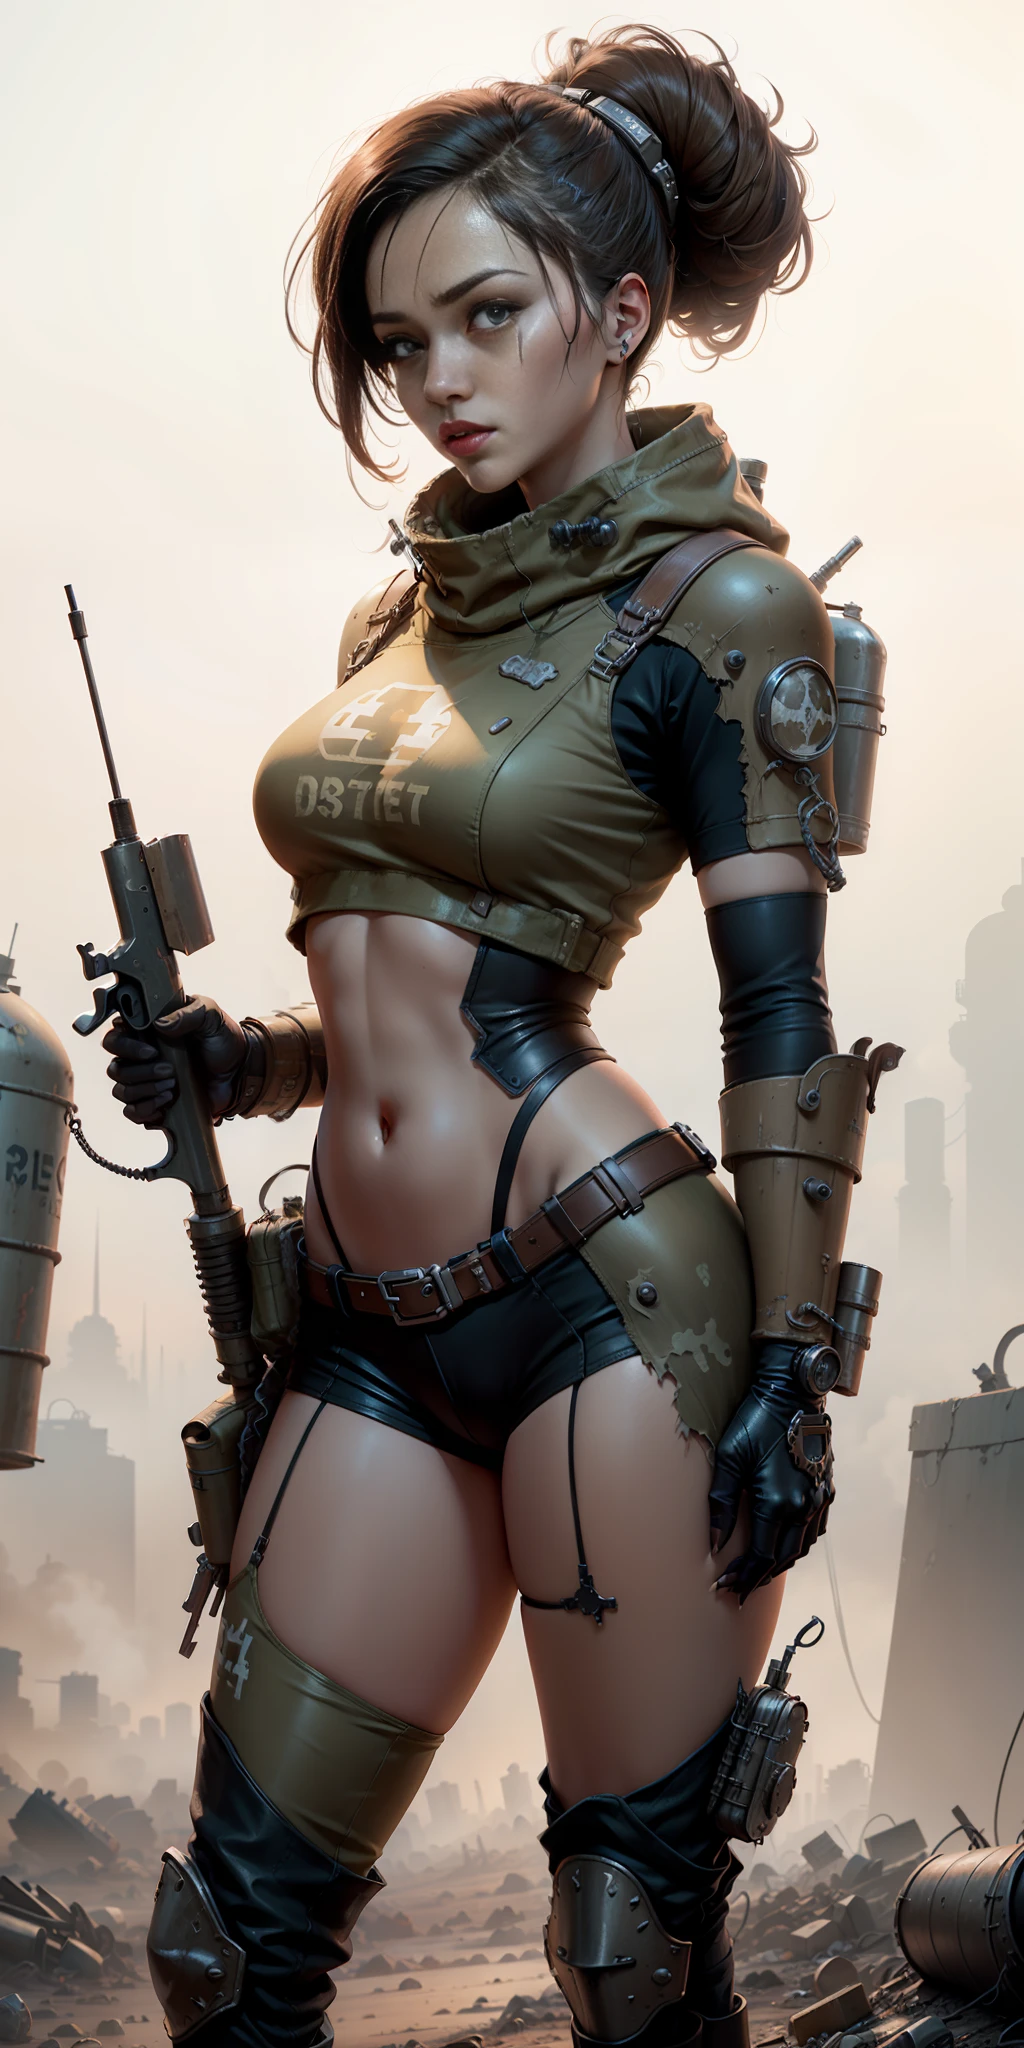 ((fallout 4)) drawing image of a woman standing on a hill with a rifle, standing, in an armored vault suit suit, female character concept art, Fallout Wasteland art, detailed, Fallout story, female character art, with a light leather armor, post-apocalyptic scavenger, ((white background)), post-apocalyptic explorer, female punk diesel,  Hyper-detailed full-body shot, post-apocalyptic costume, dieselpunk